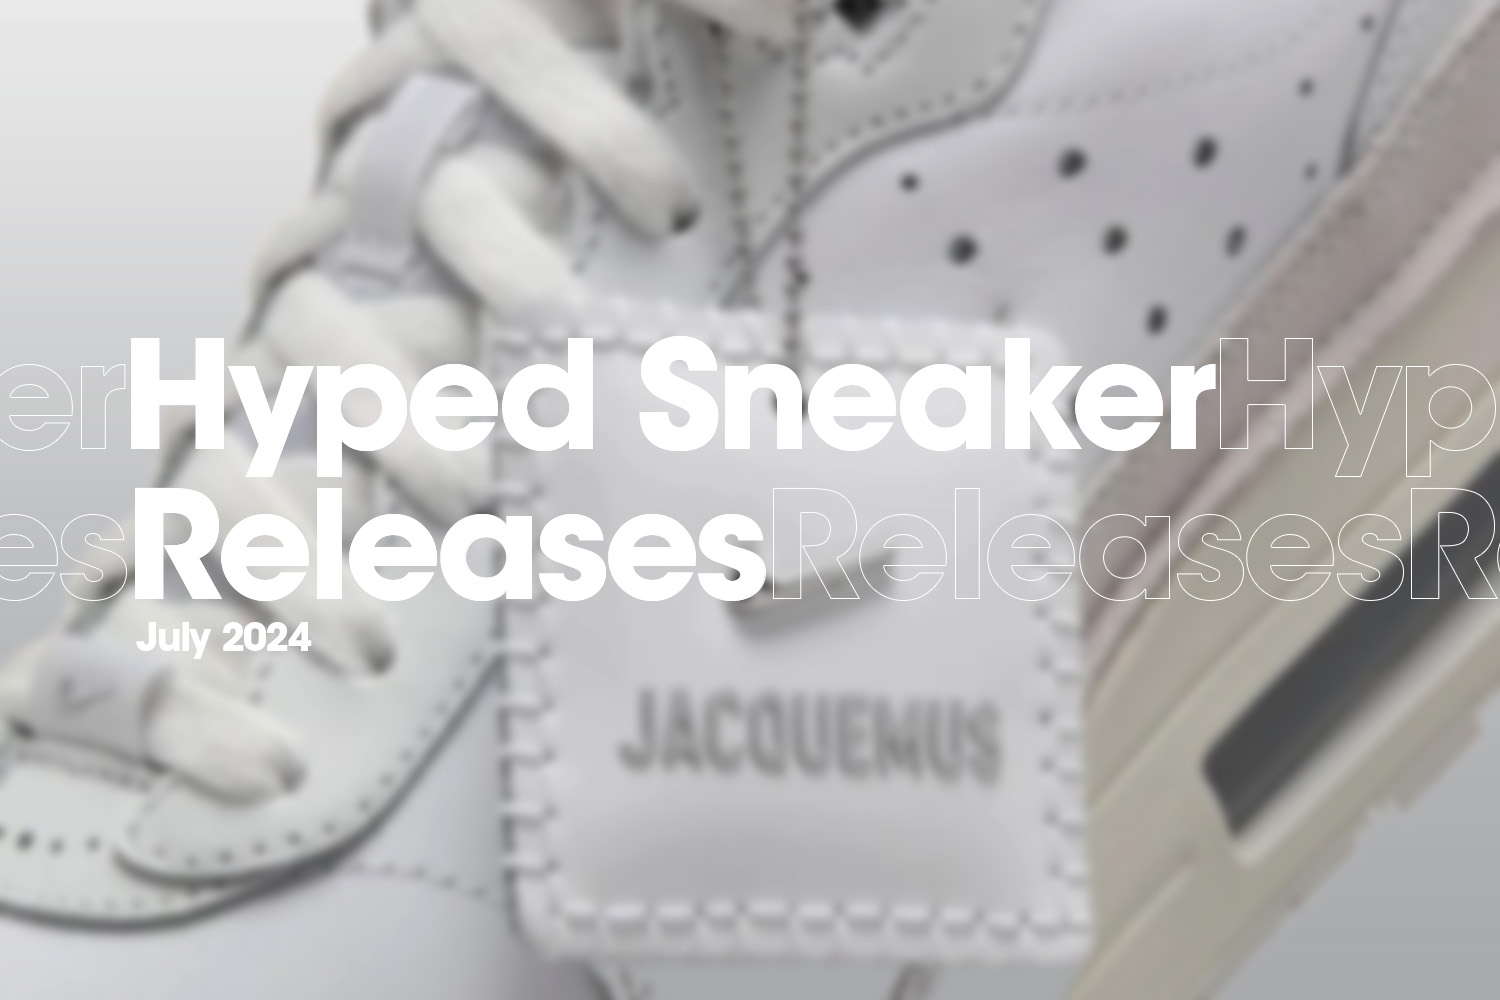 Hyped Sneaker Releases of July 2024